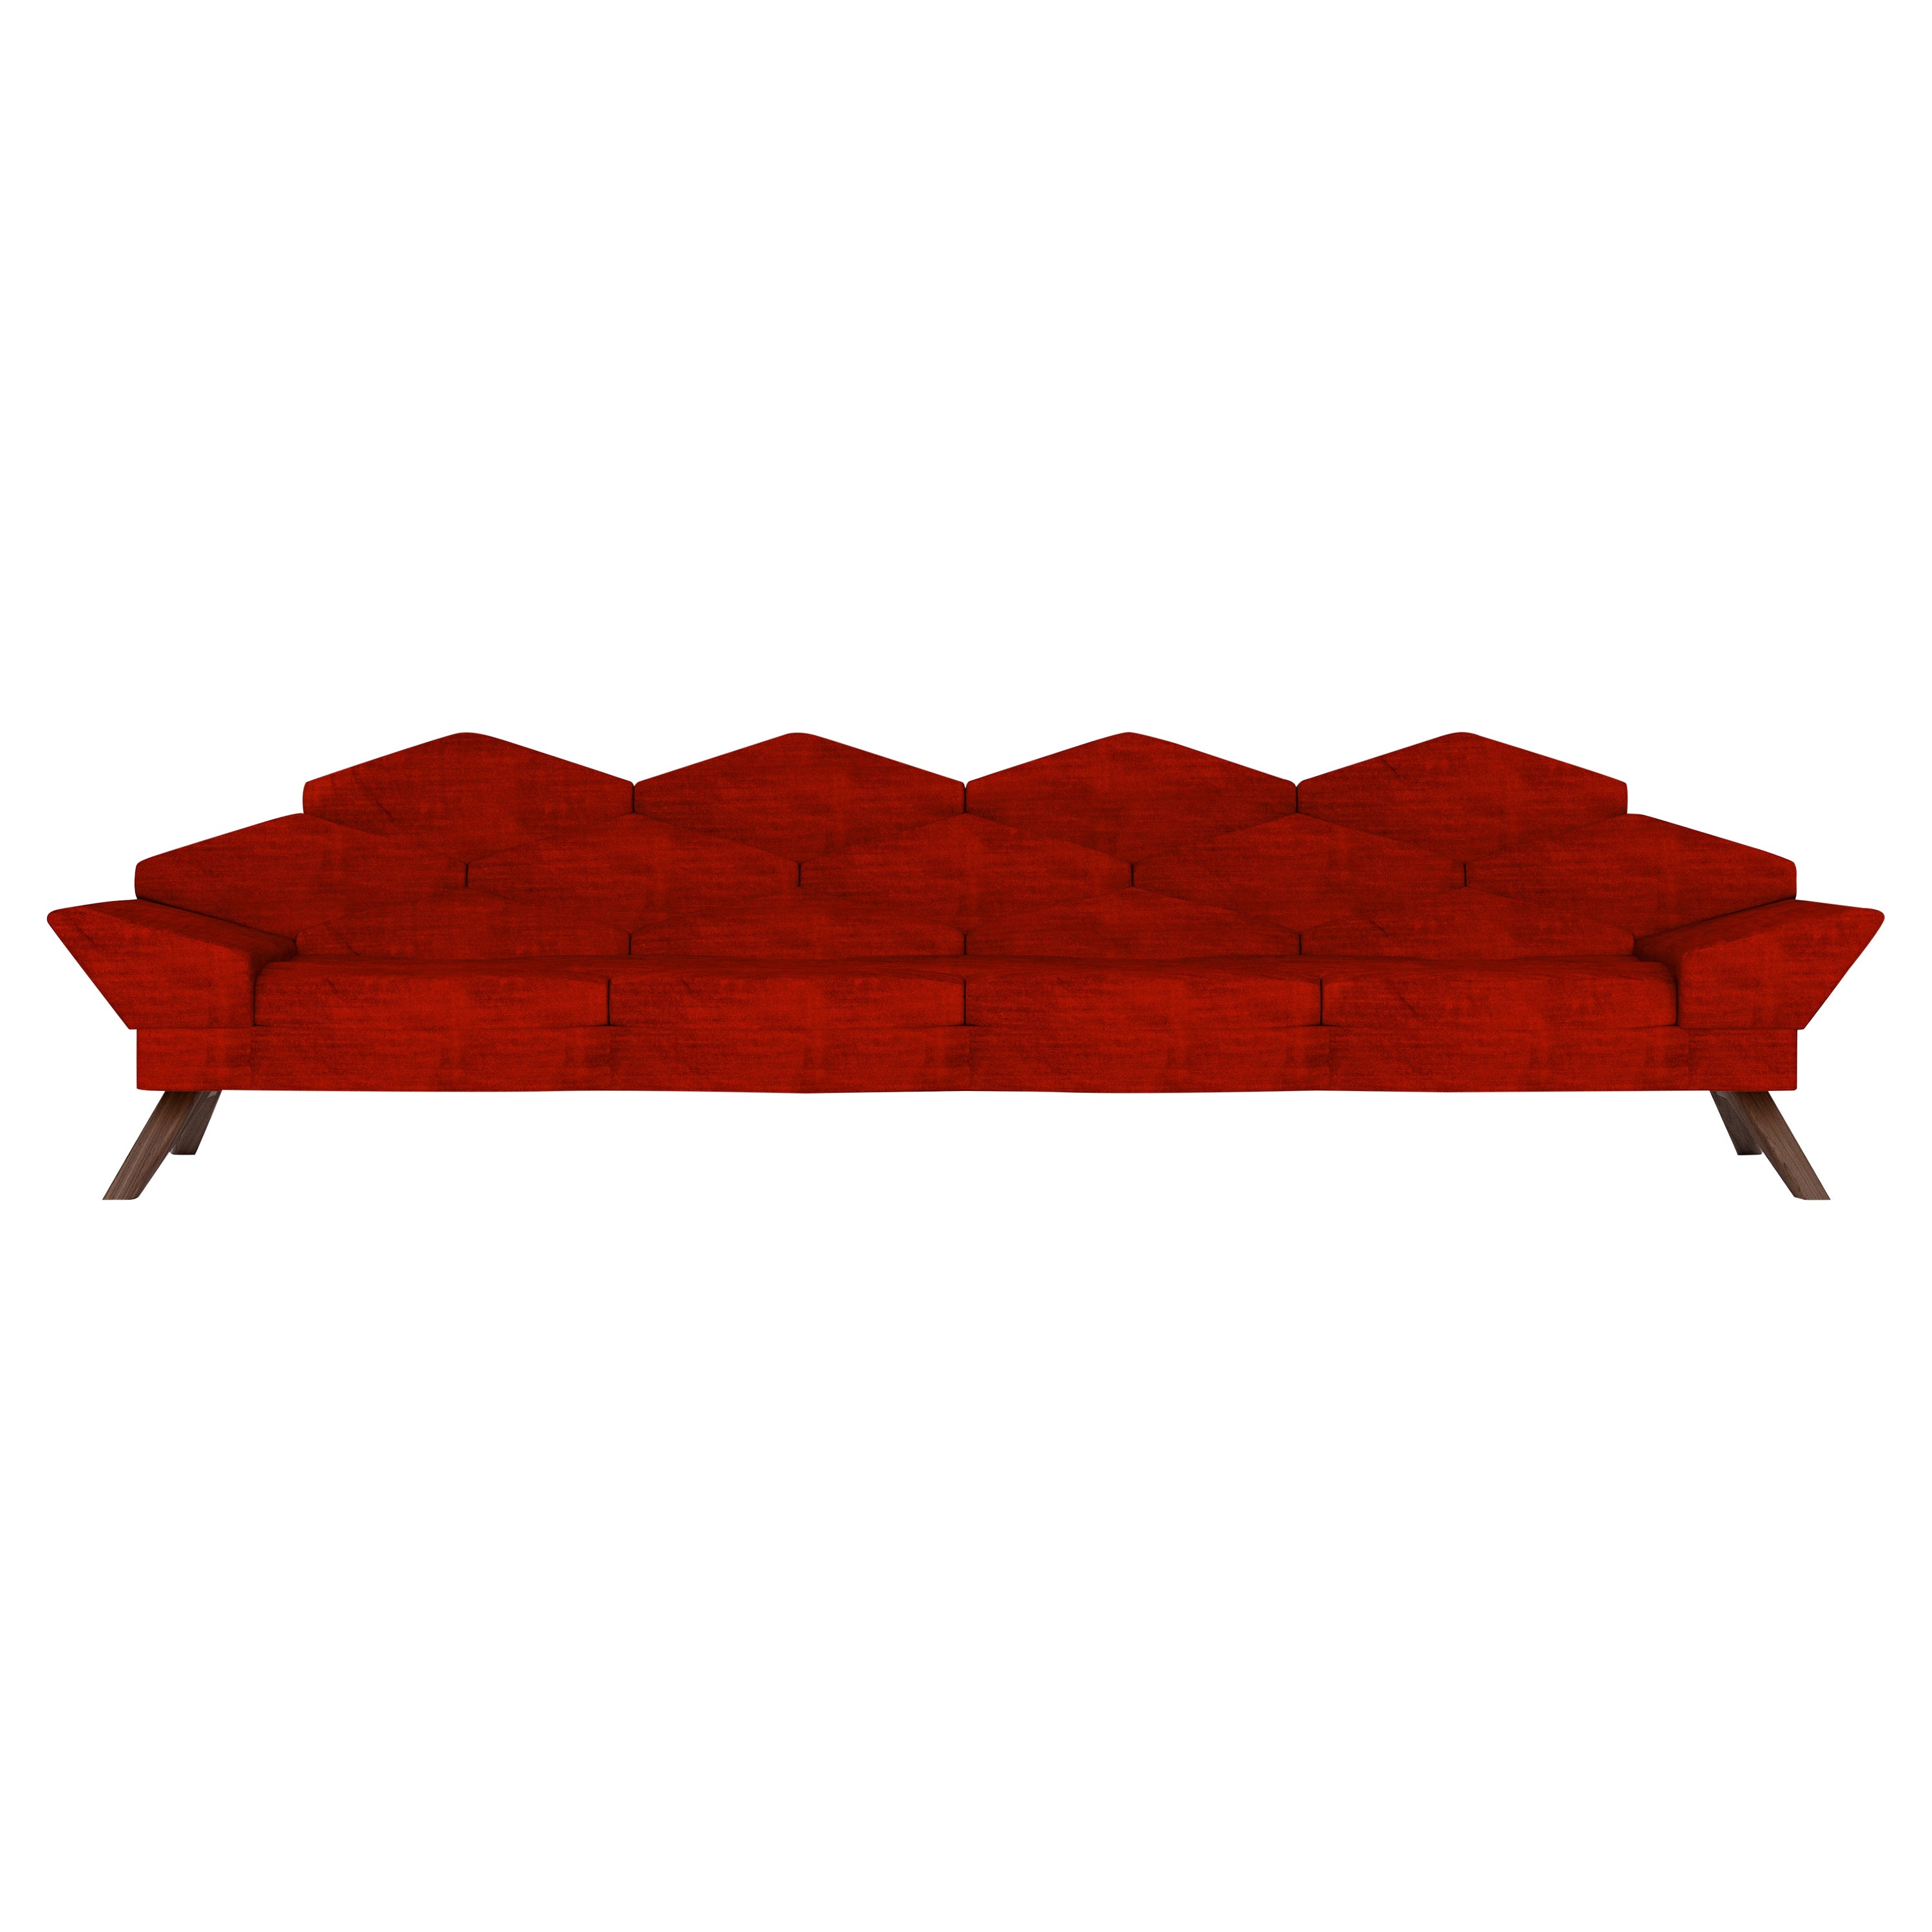 HIVE Sofa by AROUNDtheTREE For Sale